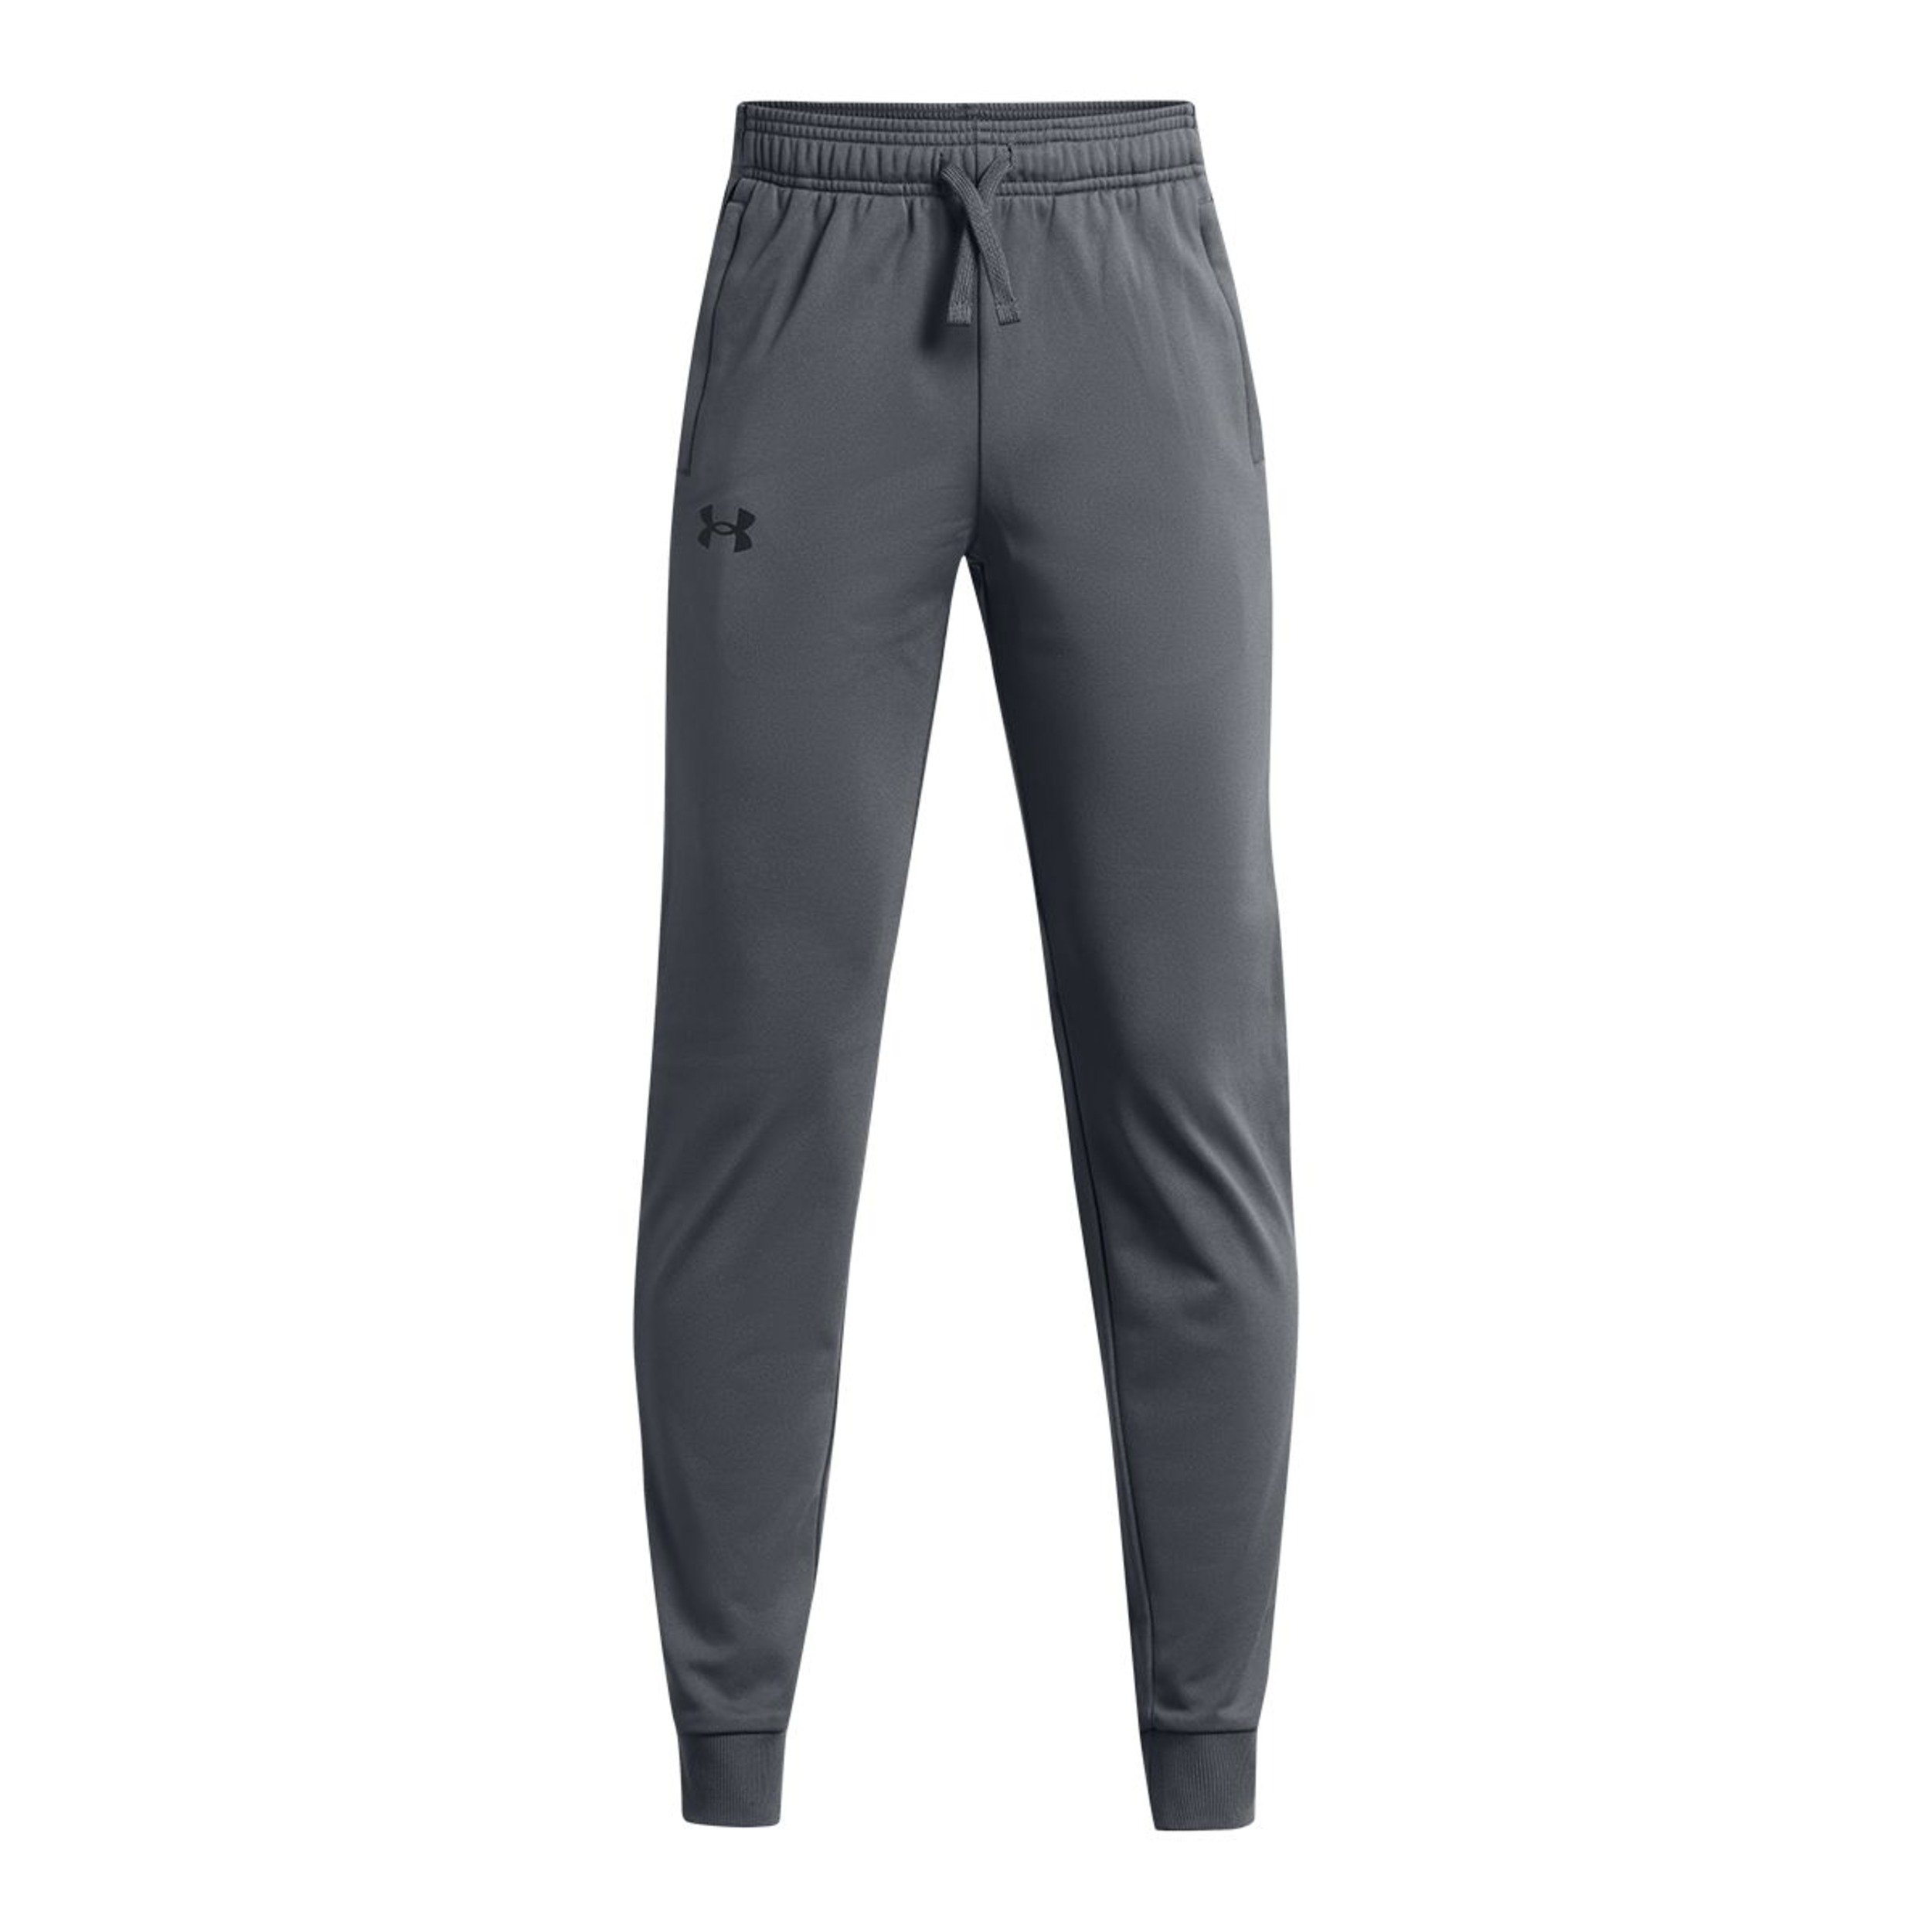 Under Armour Boys' Pennant Sweatpants, Kids', Tapered, Cuffed, Loose ...